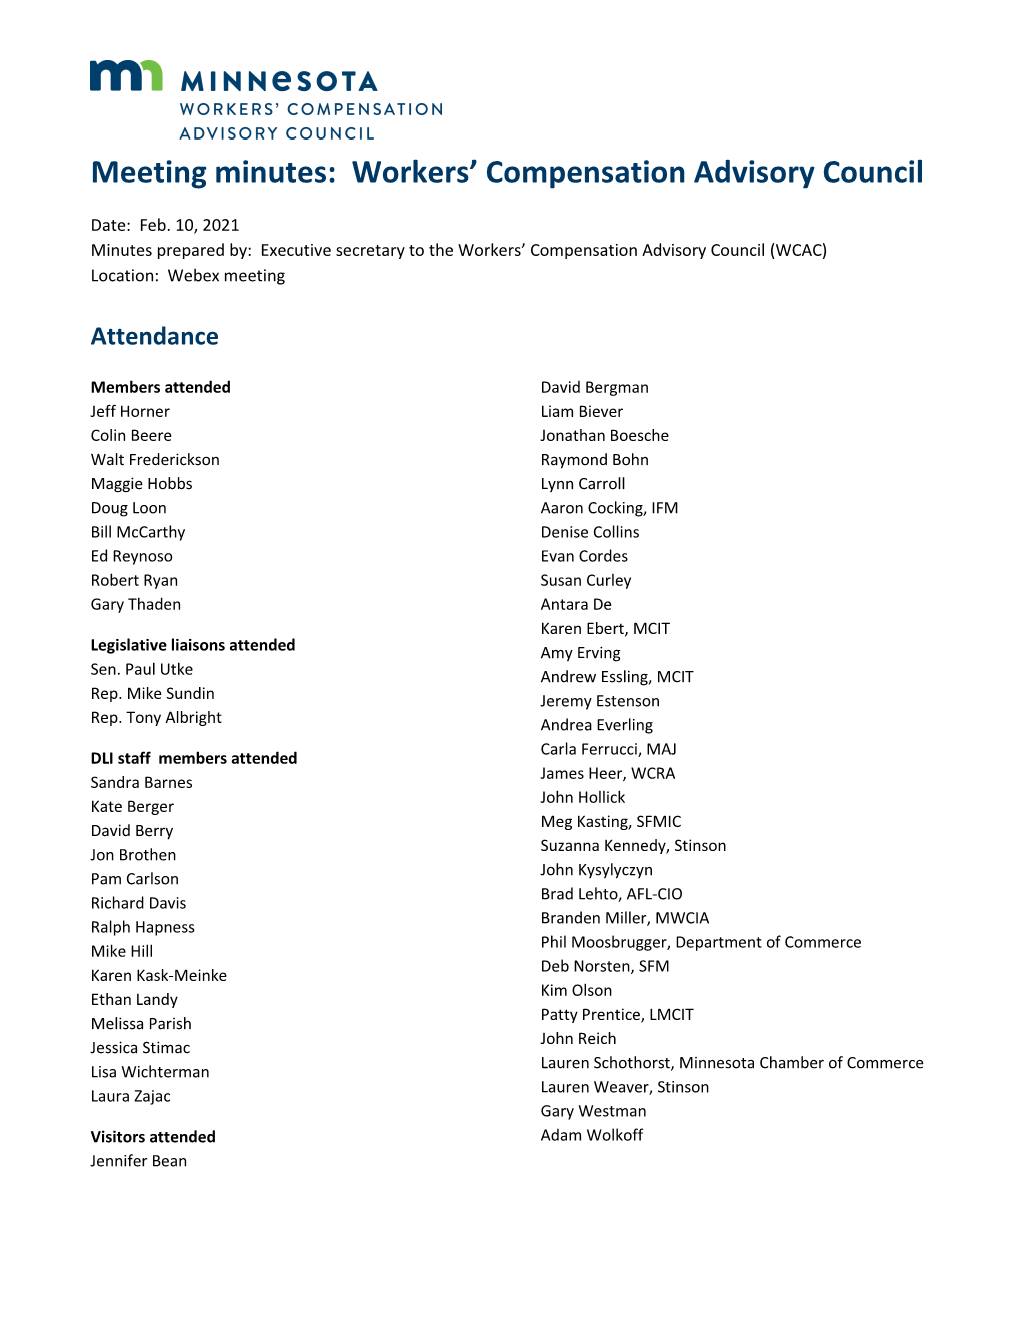 Minutes: Workers' Compensation Advisory Council, Feb. 10, 2021